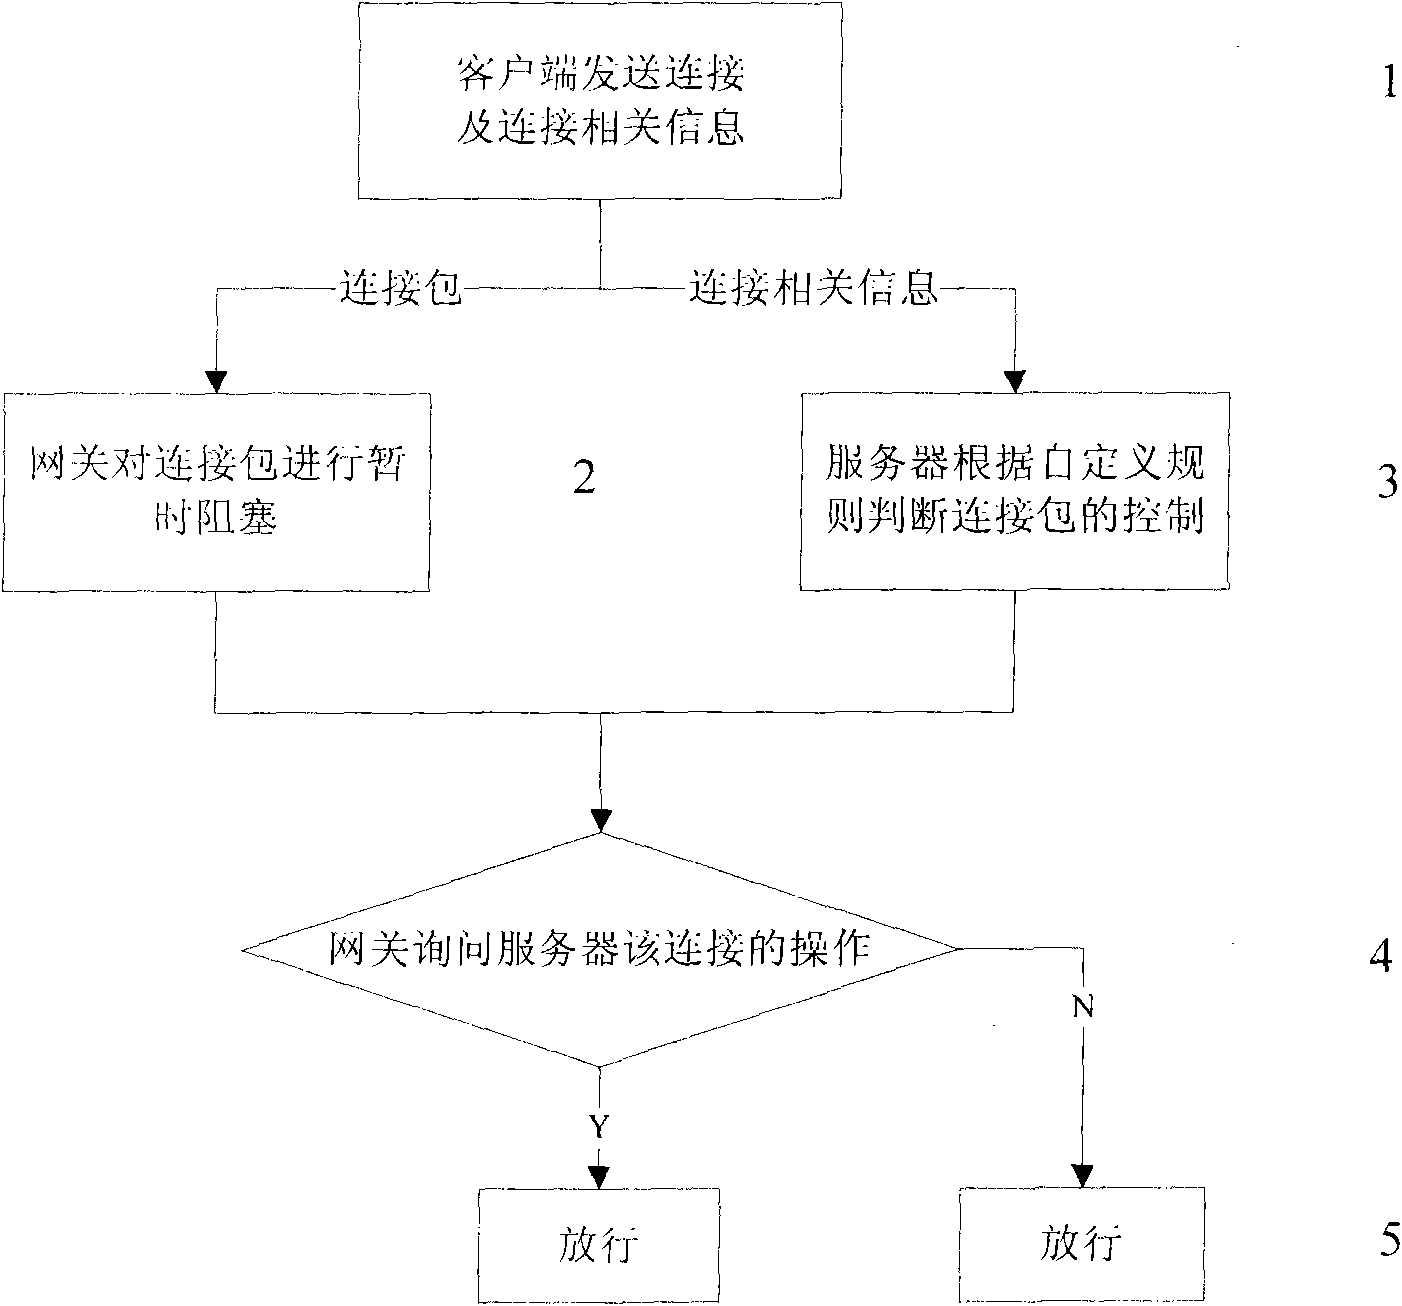 Fine-granularity network access control method based on user connection information